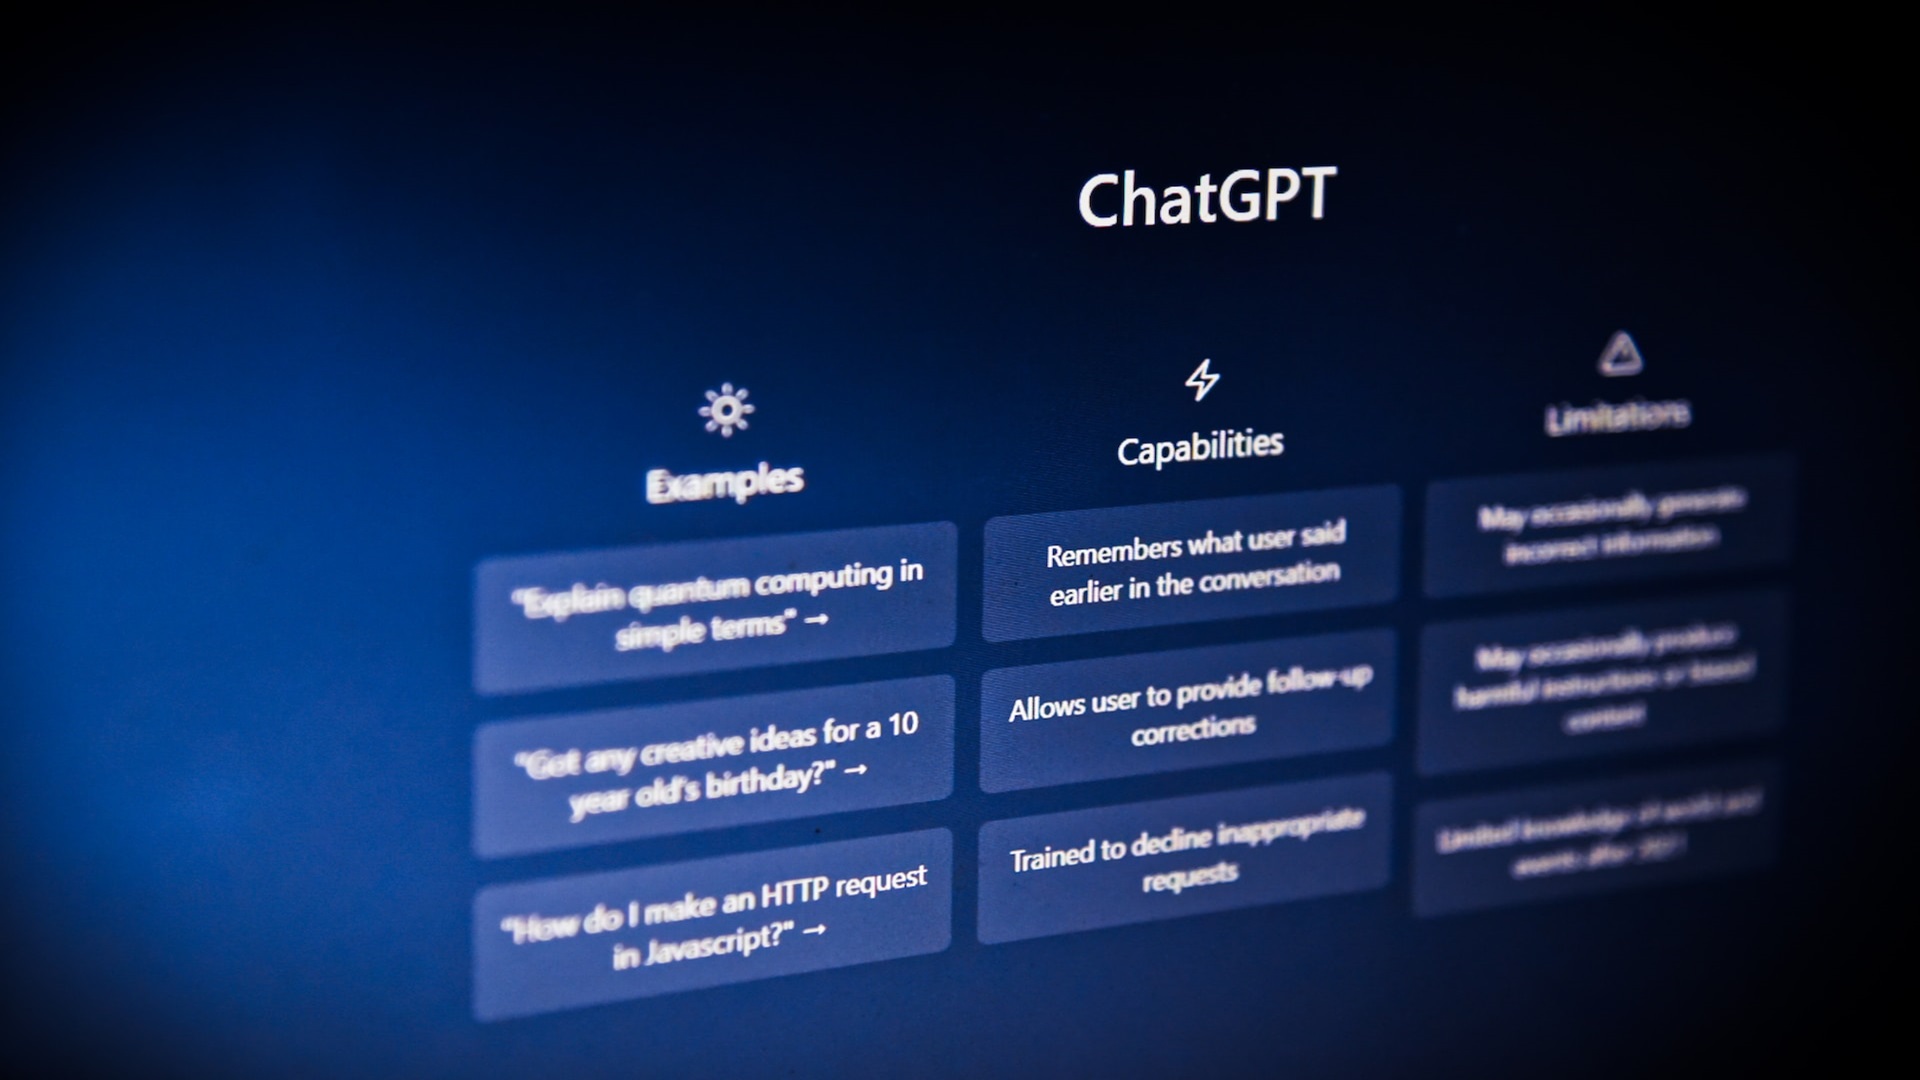 5 Ways to Use ChatGPT to Create Cyber Security Tools